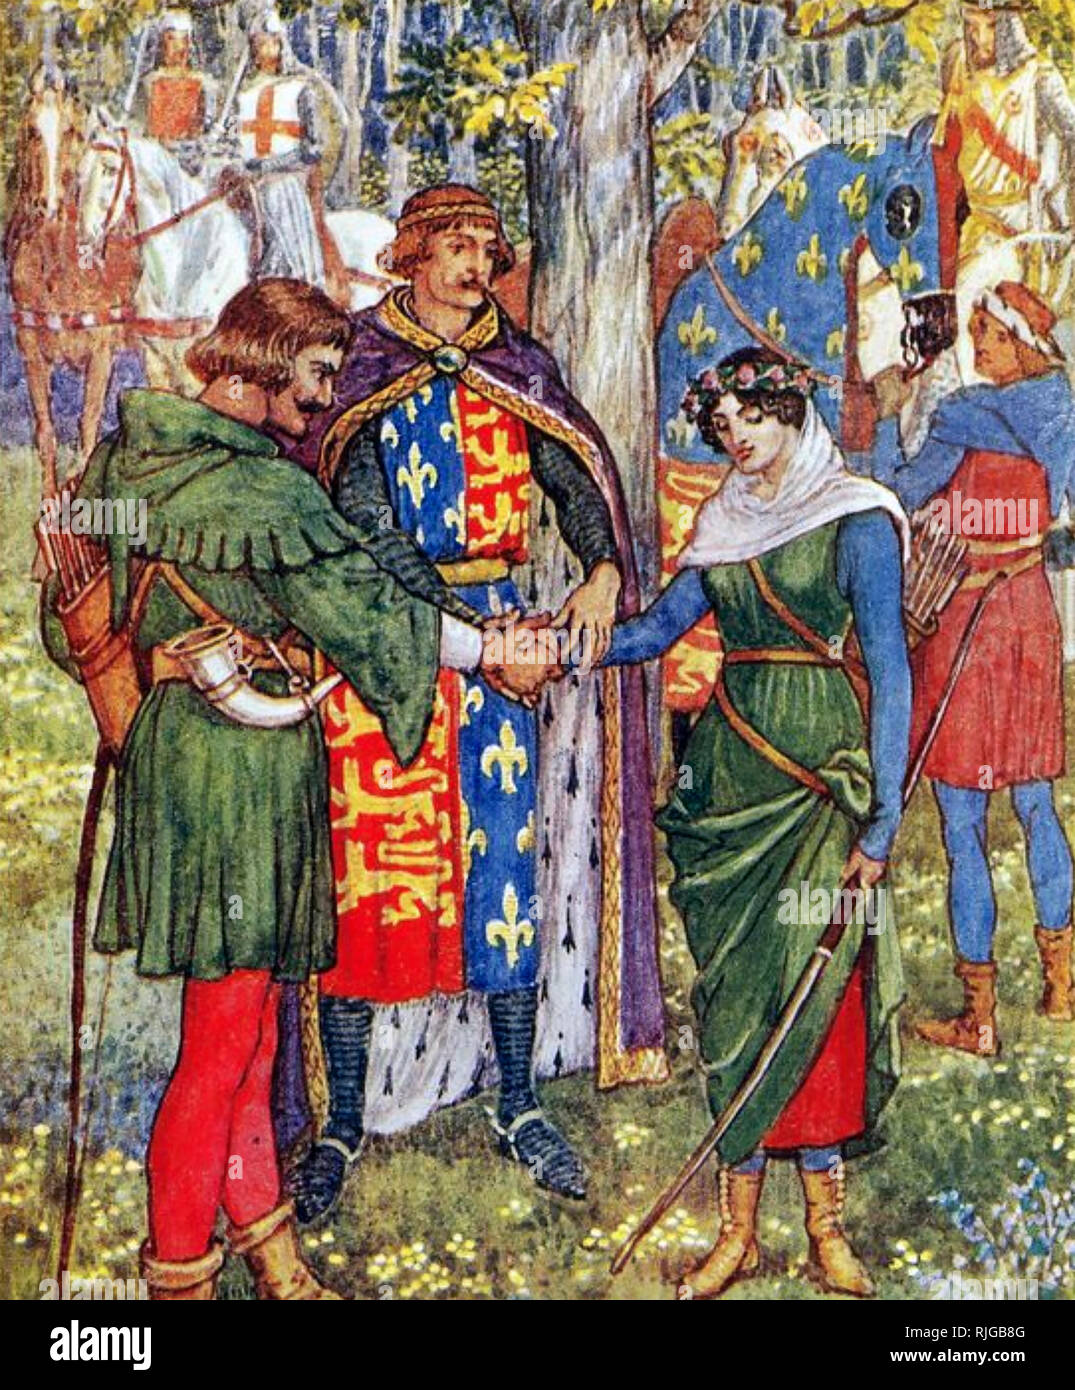 THE MARRIAGE OF ROBIN HOOD AND MAID MARIAN from Henry Gilbert's book "Robin  Hood and the Men of the Greenwood" illustrated by Walter Crane, published  in 1912 Stock Photo - Alamy